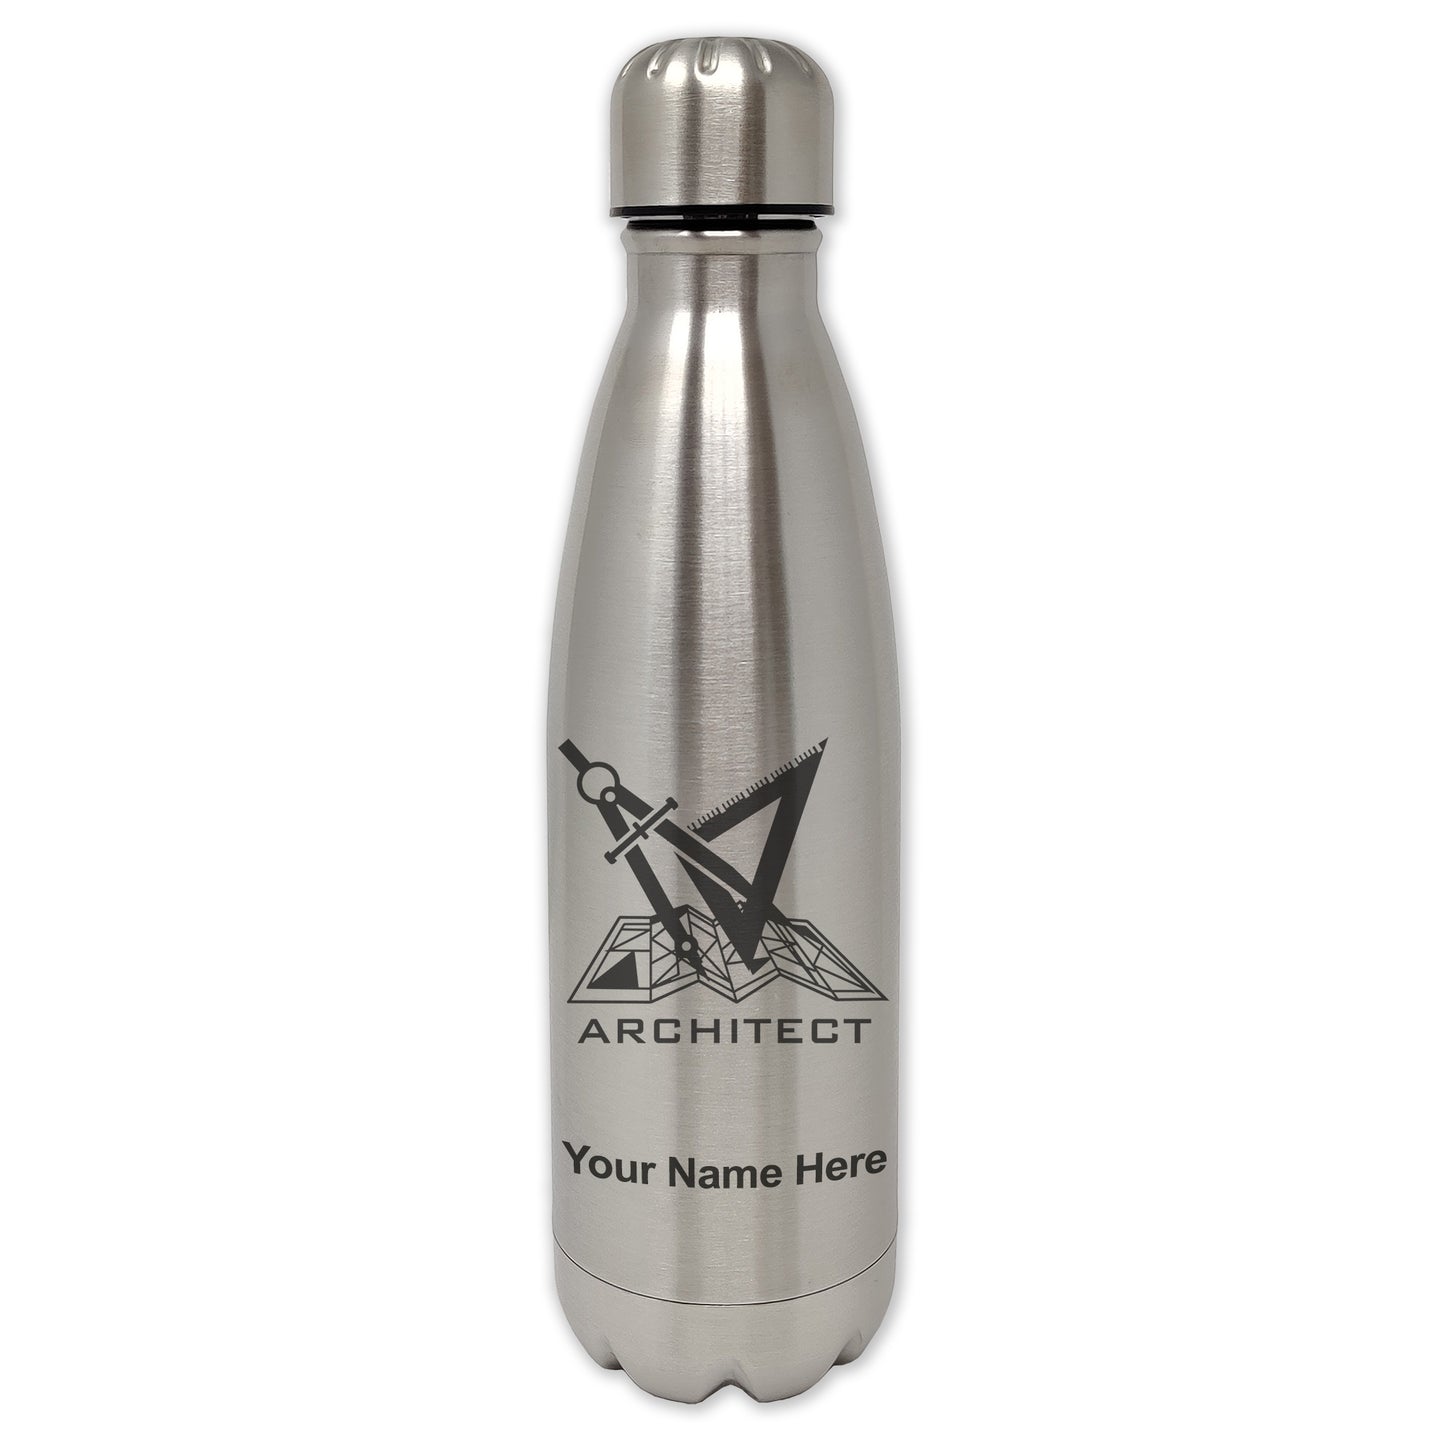 LaserGram Single Wall Water Bottle, Architect Symbol, Personalized Engraving Included